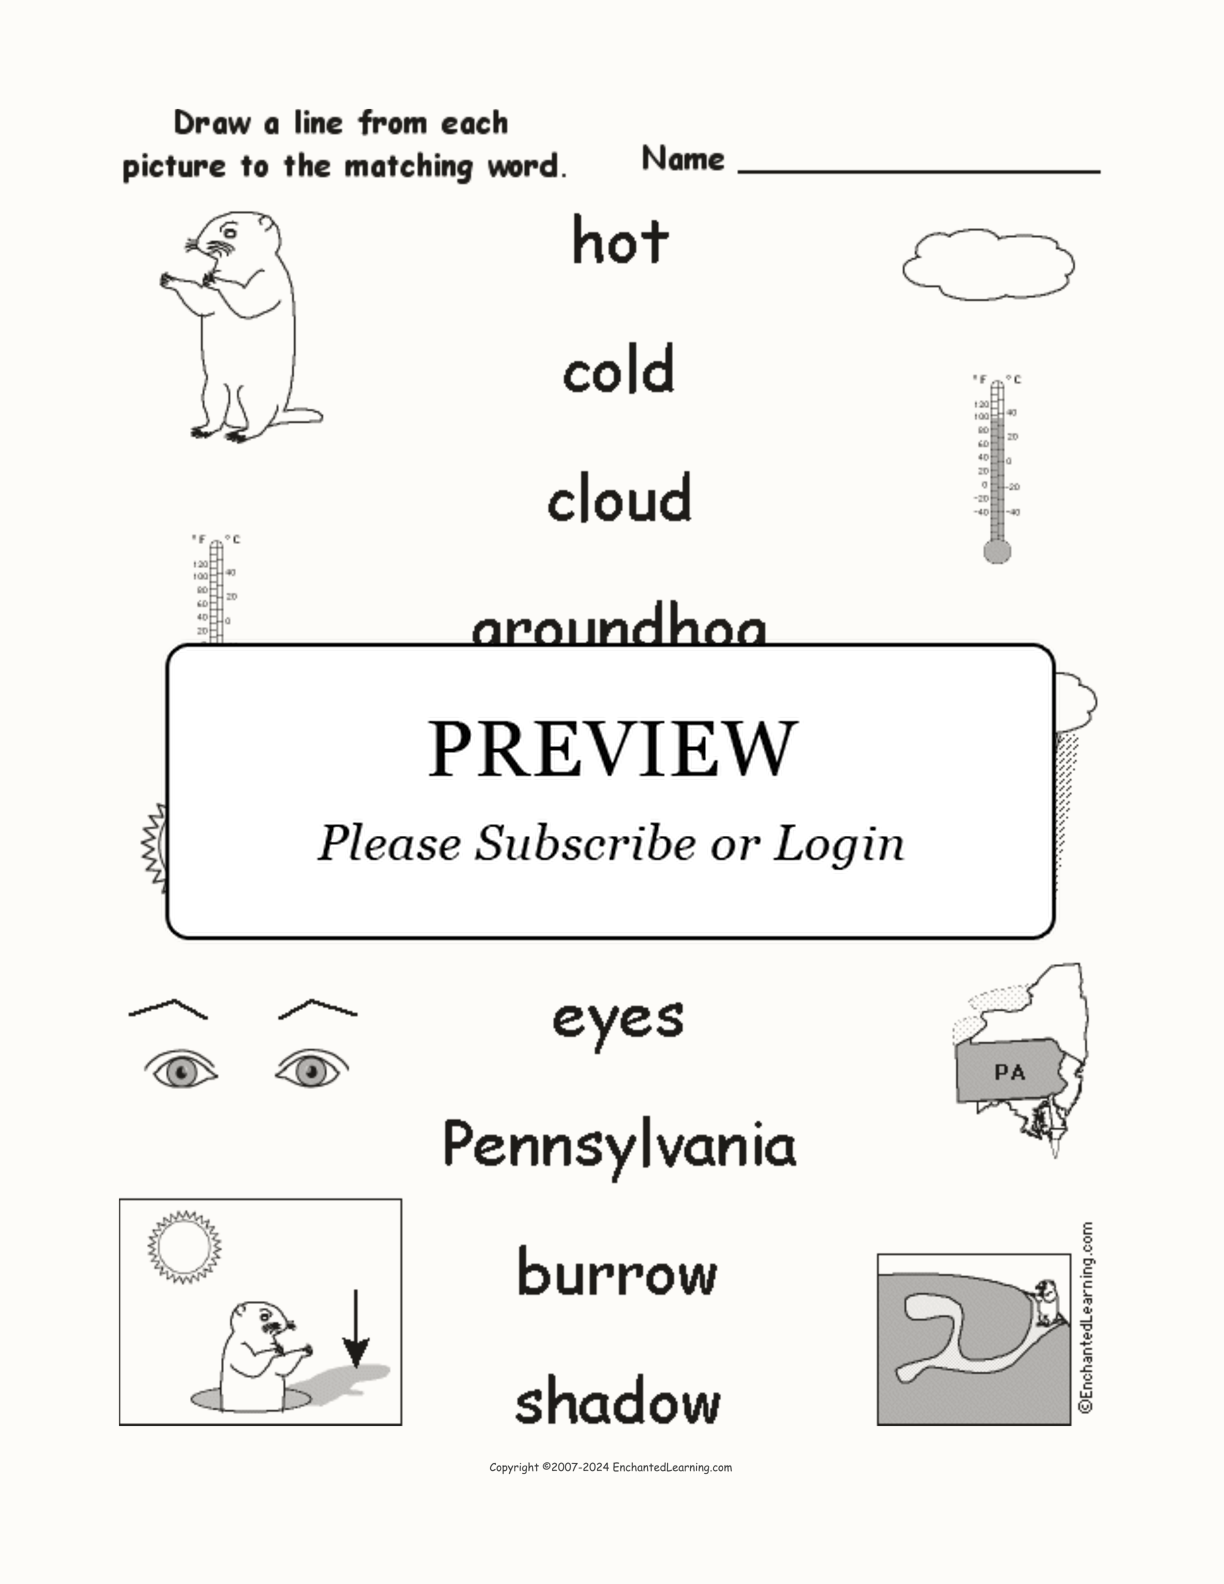 Groundhog Day - Match the Words to the Pictures interactive worksheet page 1